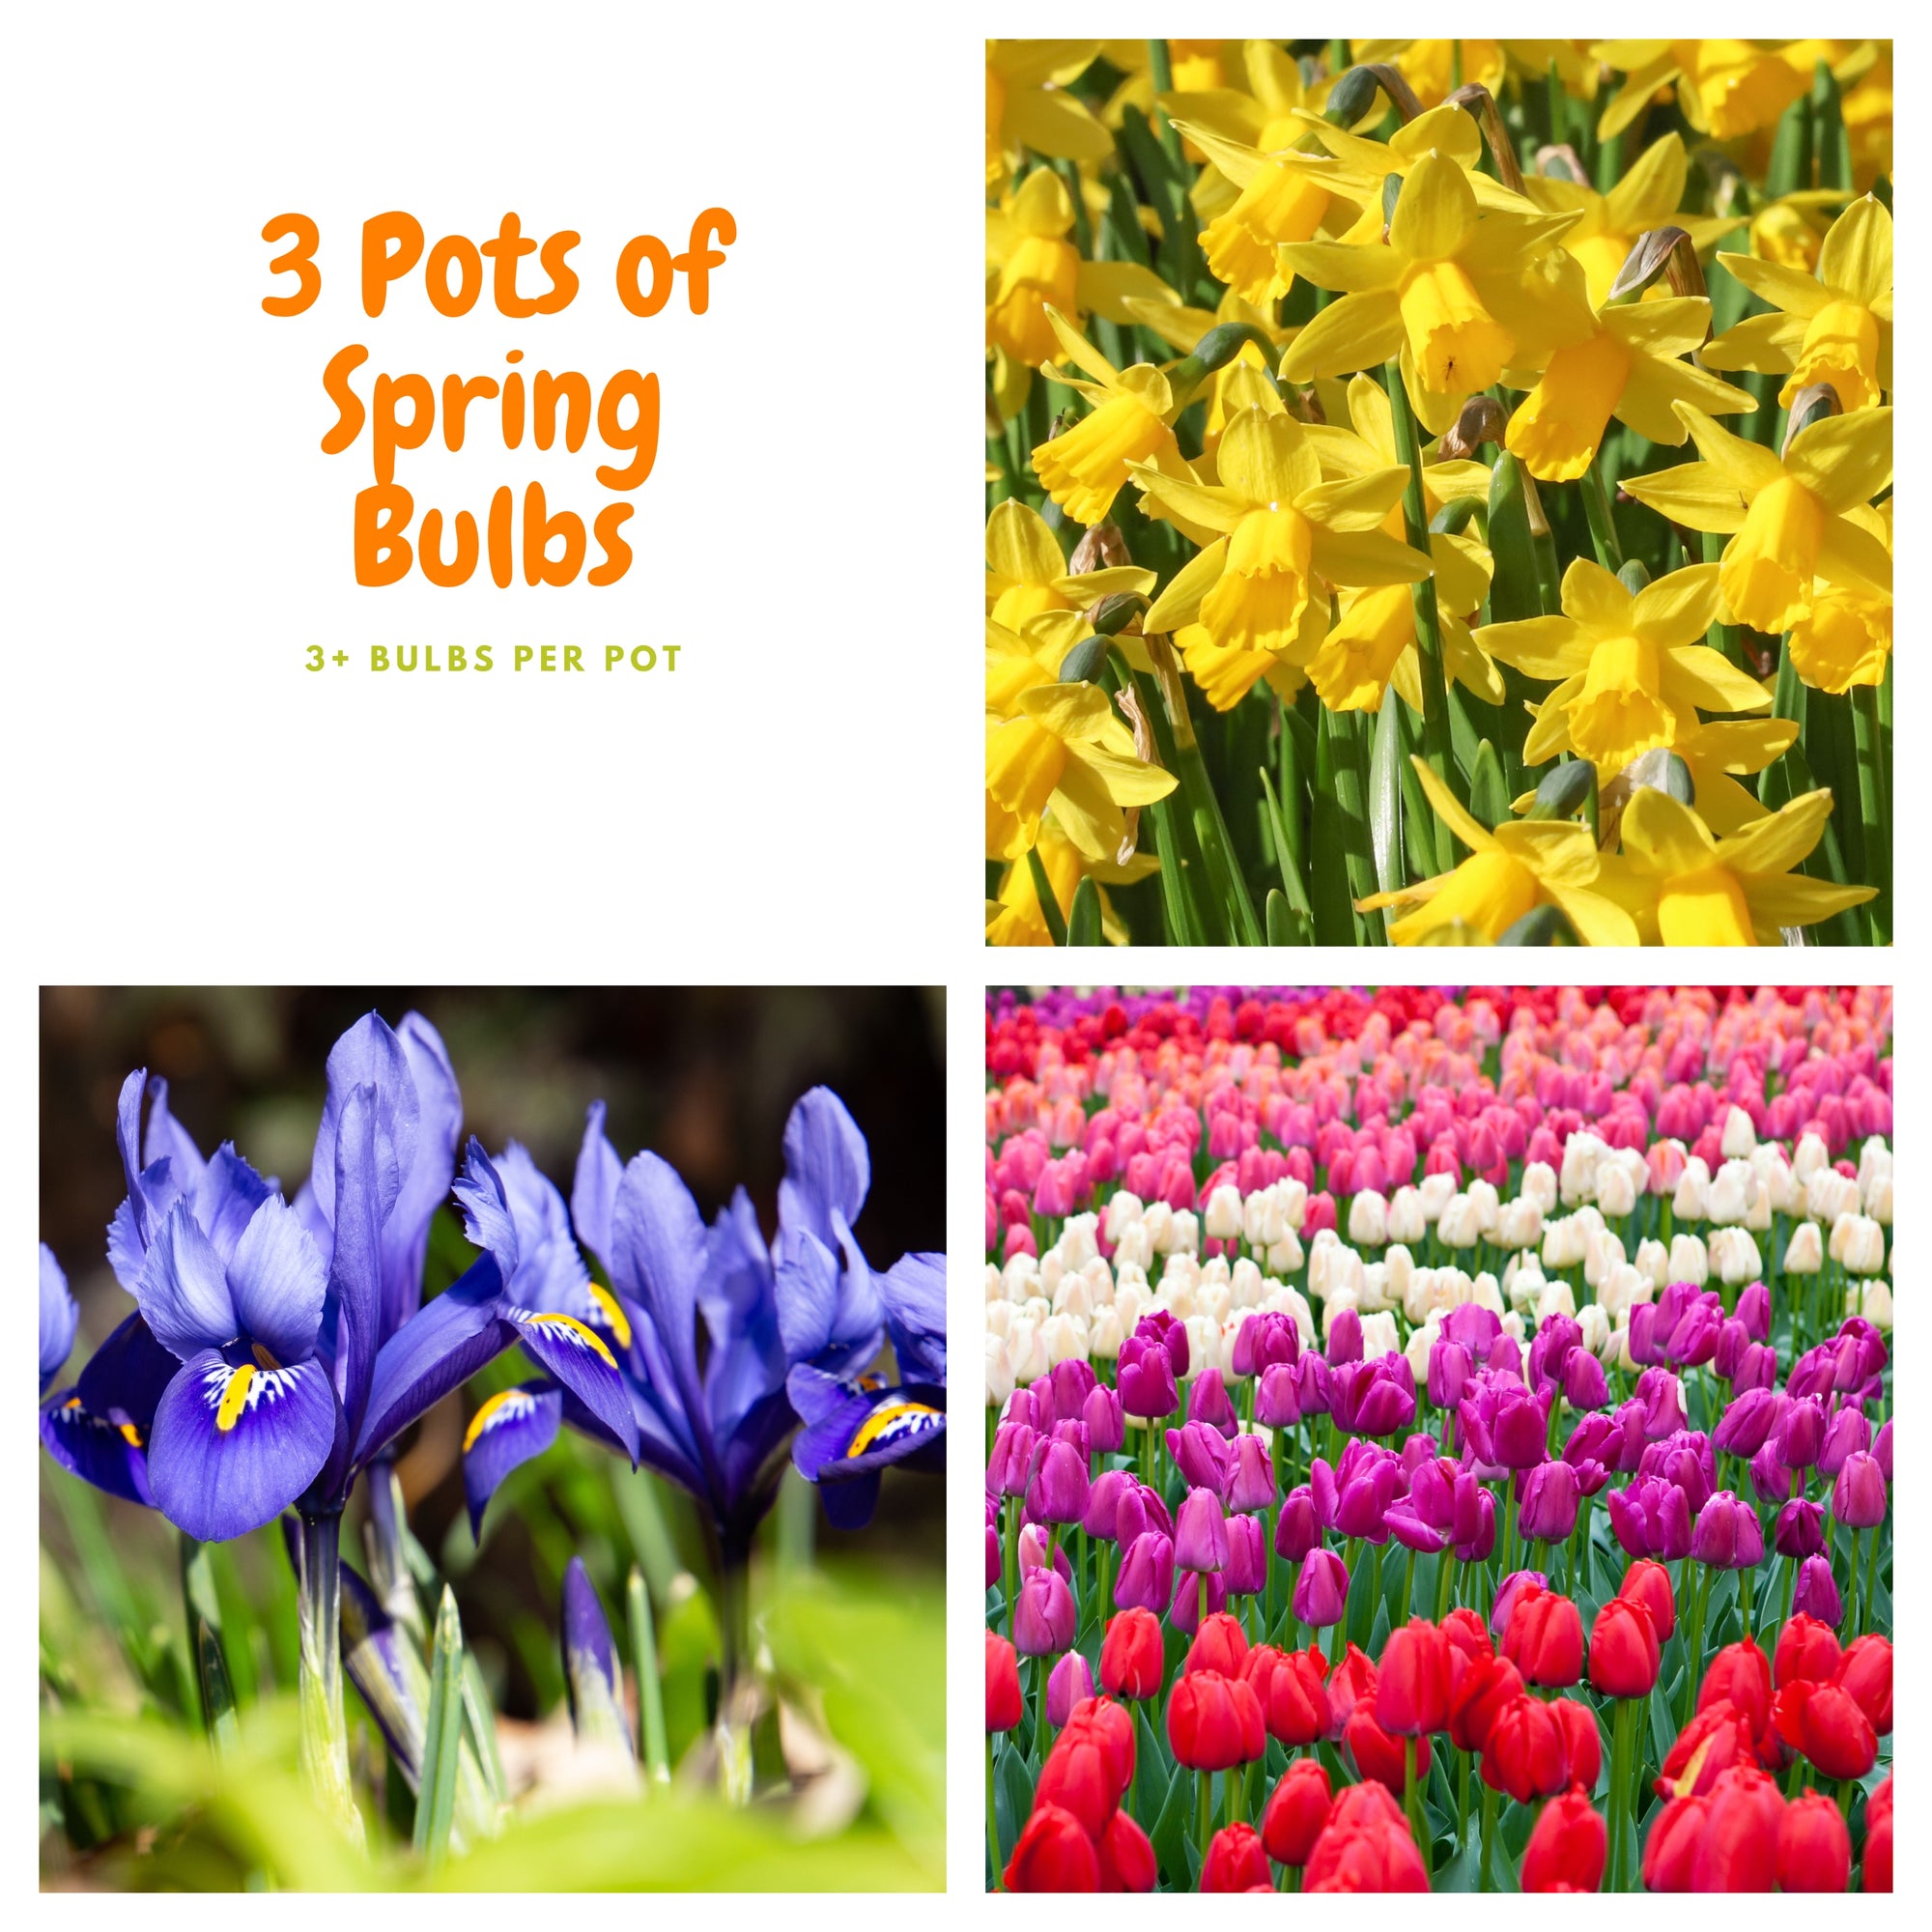 Our selection of 3 Potted Spring Bulbs